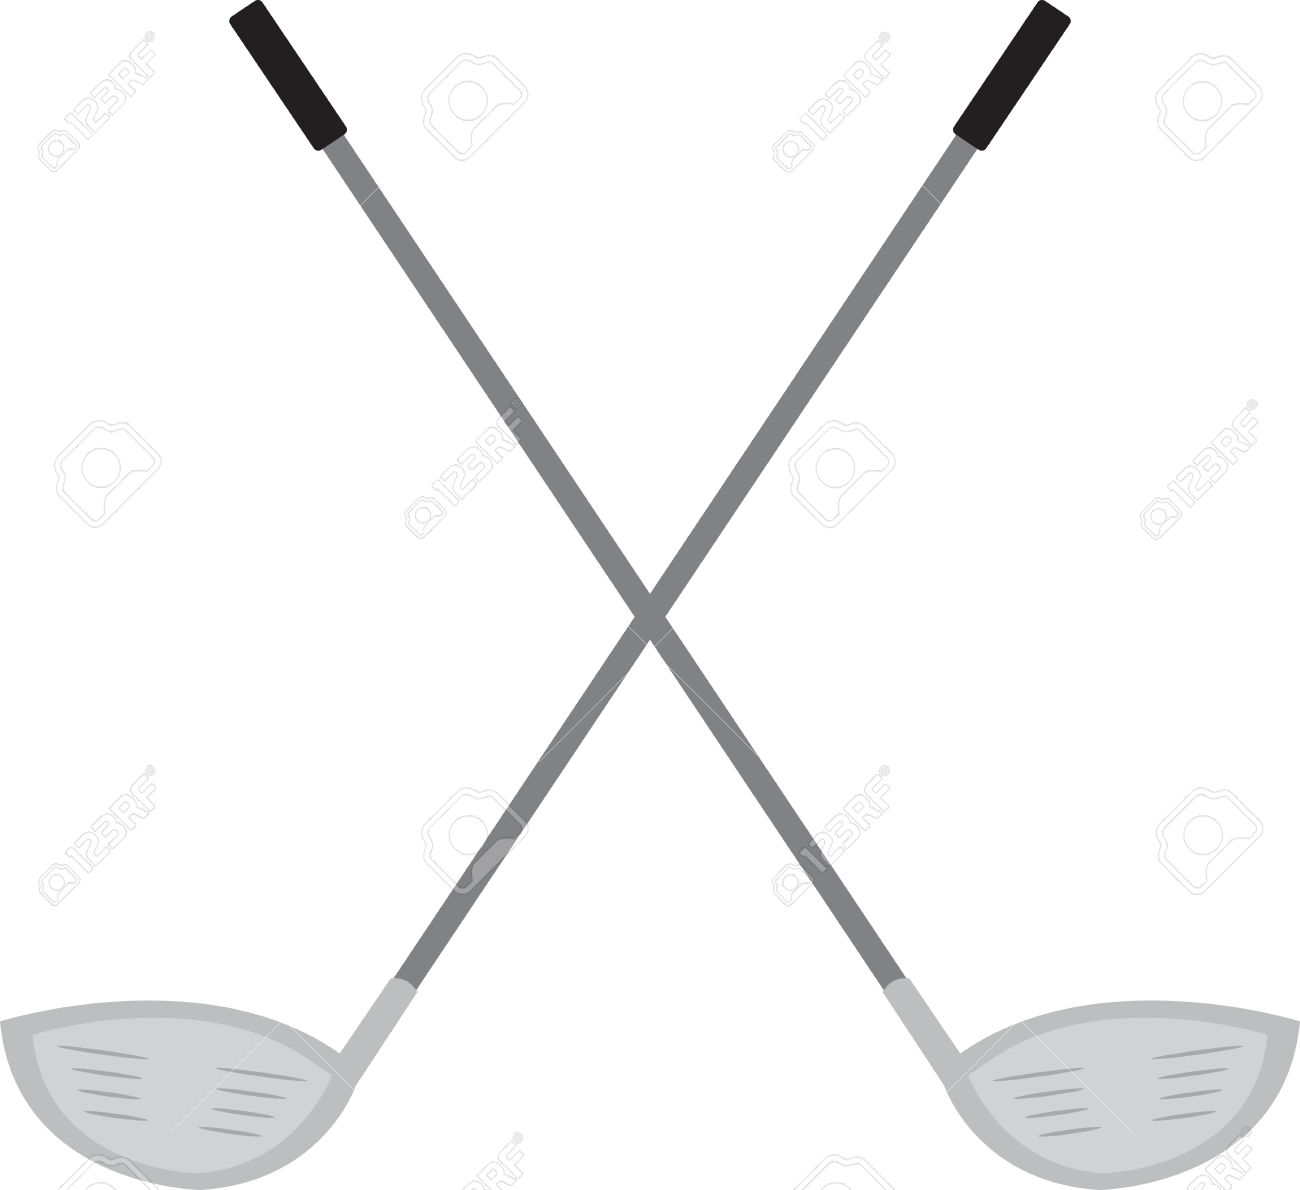 Best clubs clipartion com. Golf clipart crossed golf club